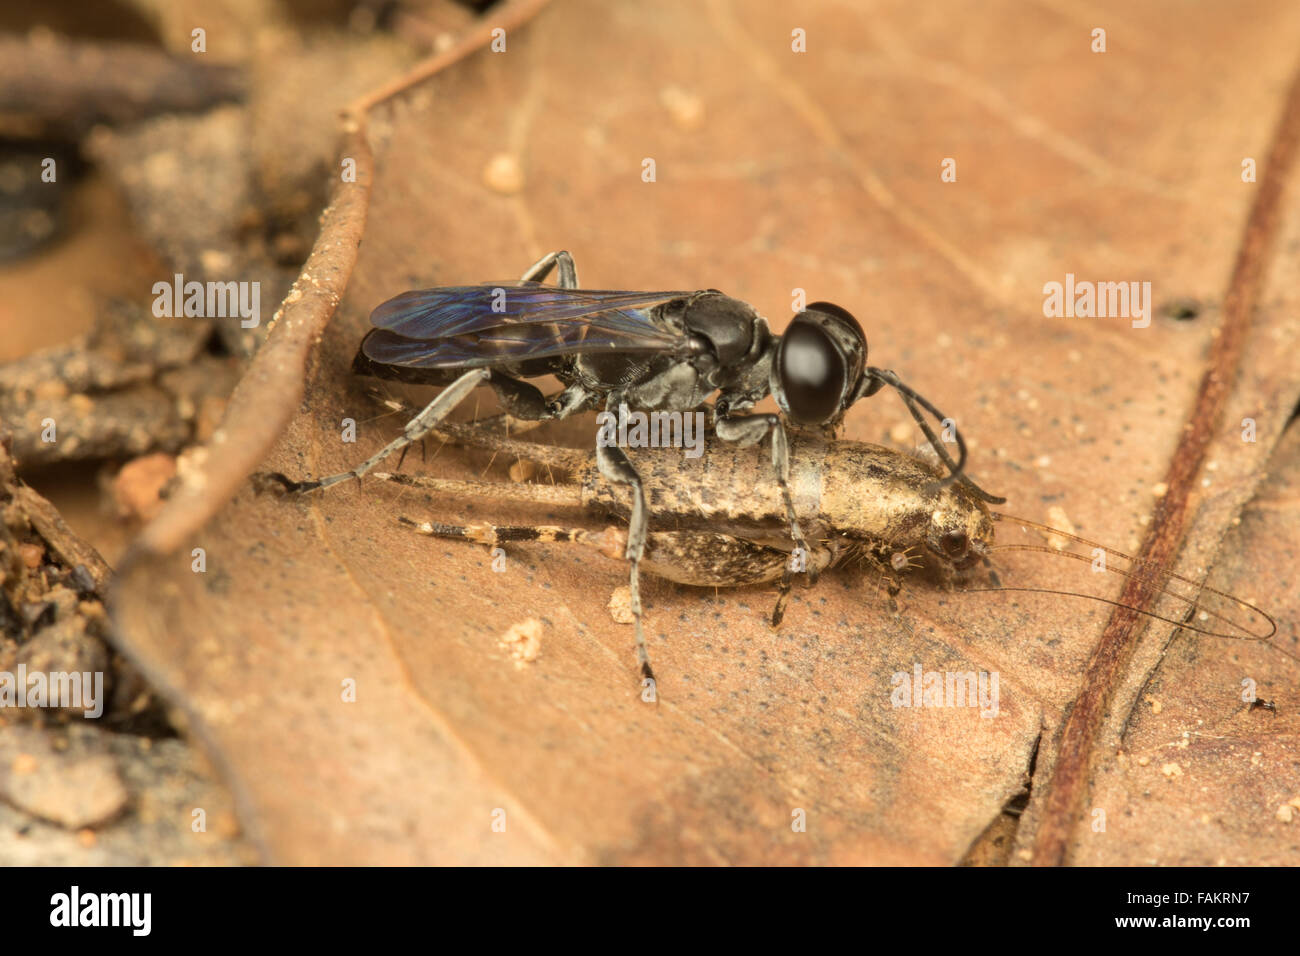 A Crabronidae wasp disabling a cricket, for food for its larvae. Keang Krachan National Park, Thailand. Stock Photo